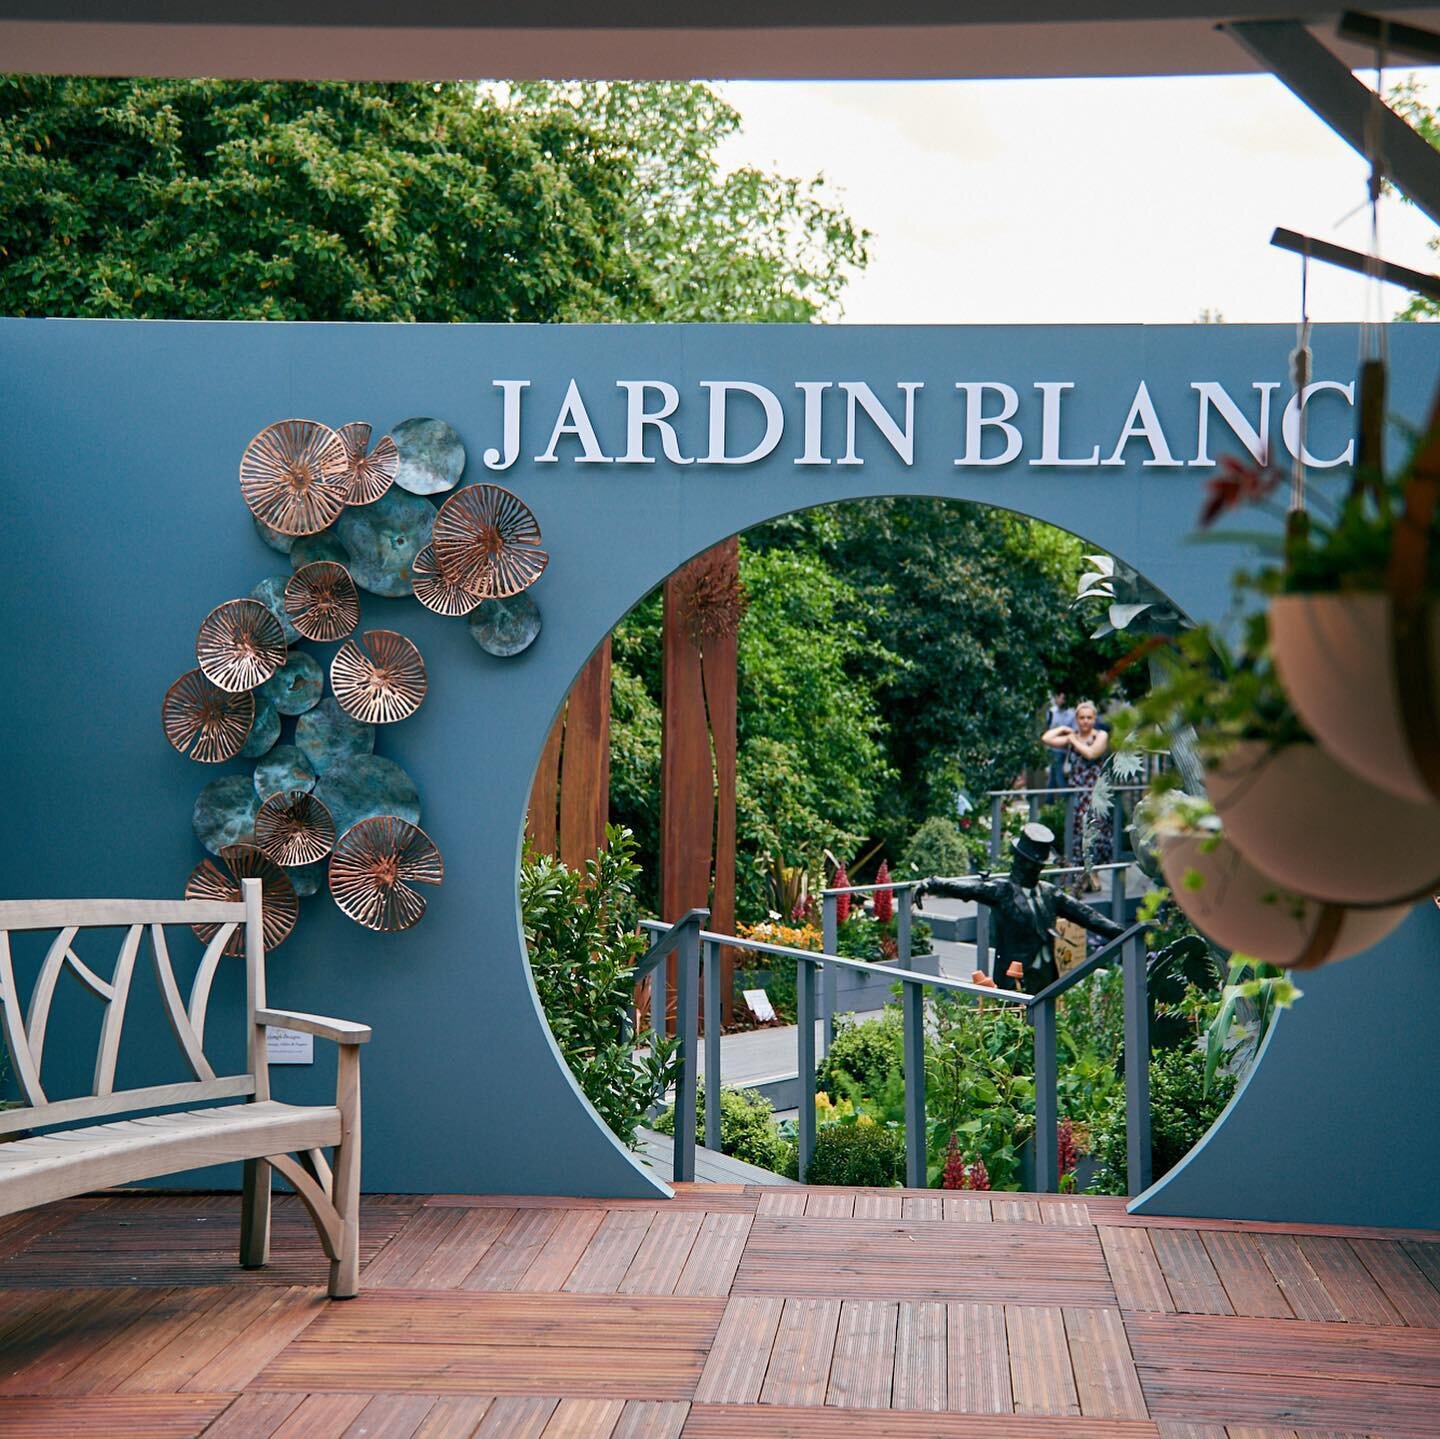 We&rsquo;re really missing being onsite building the beautiful @jardinblancchelsea for @sodexoprestige but very much looking forward to the new September show! This year is going to be a cracker. So many great contributors make this project as incred